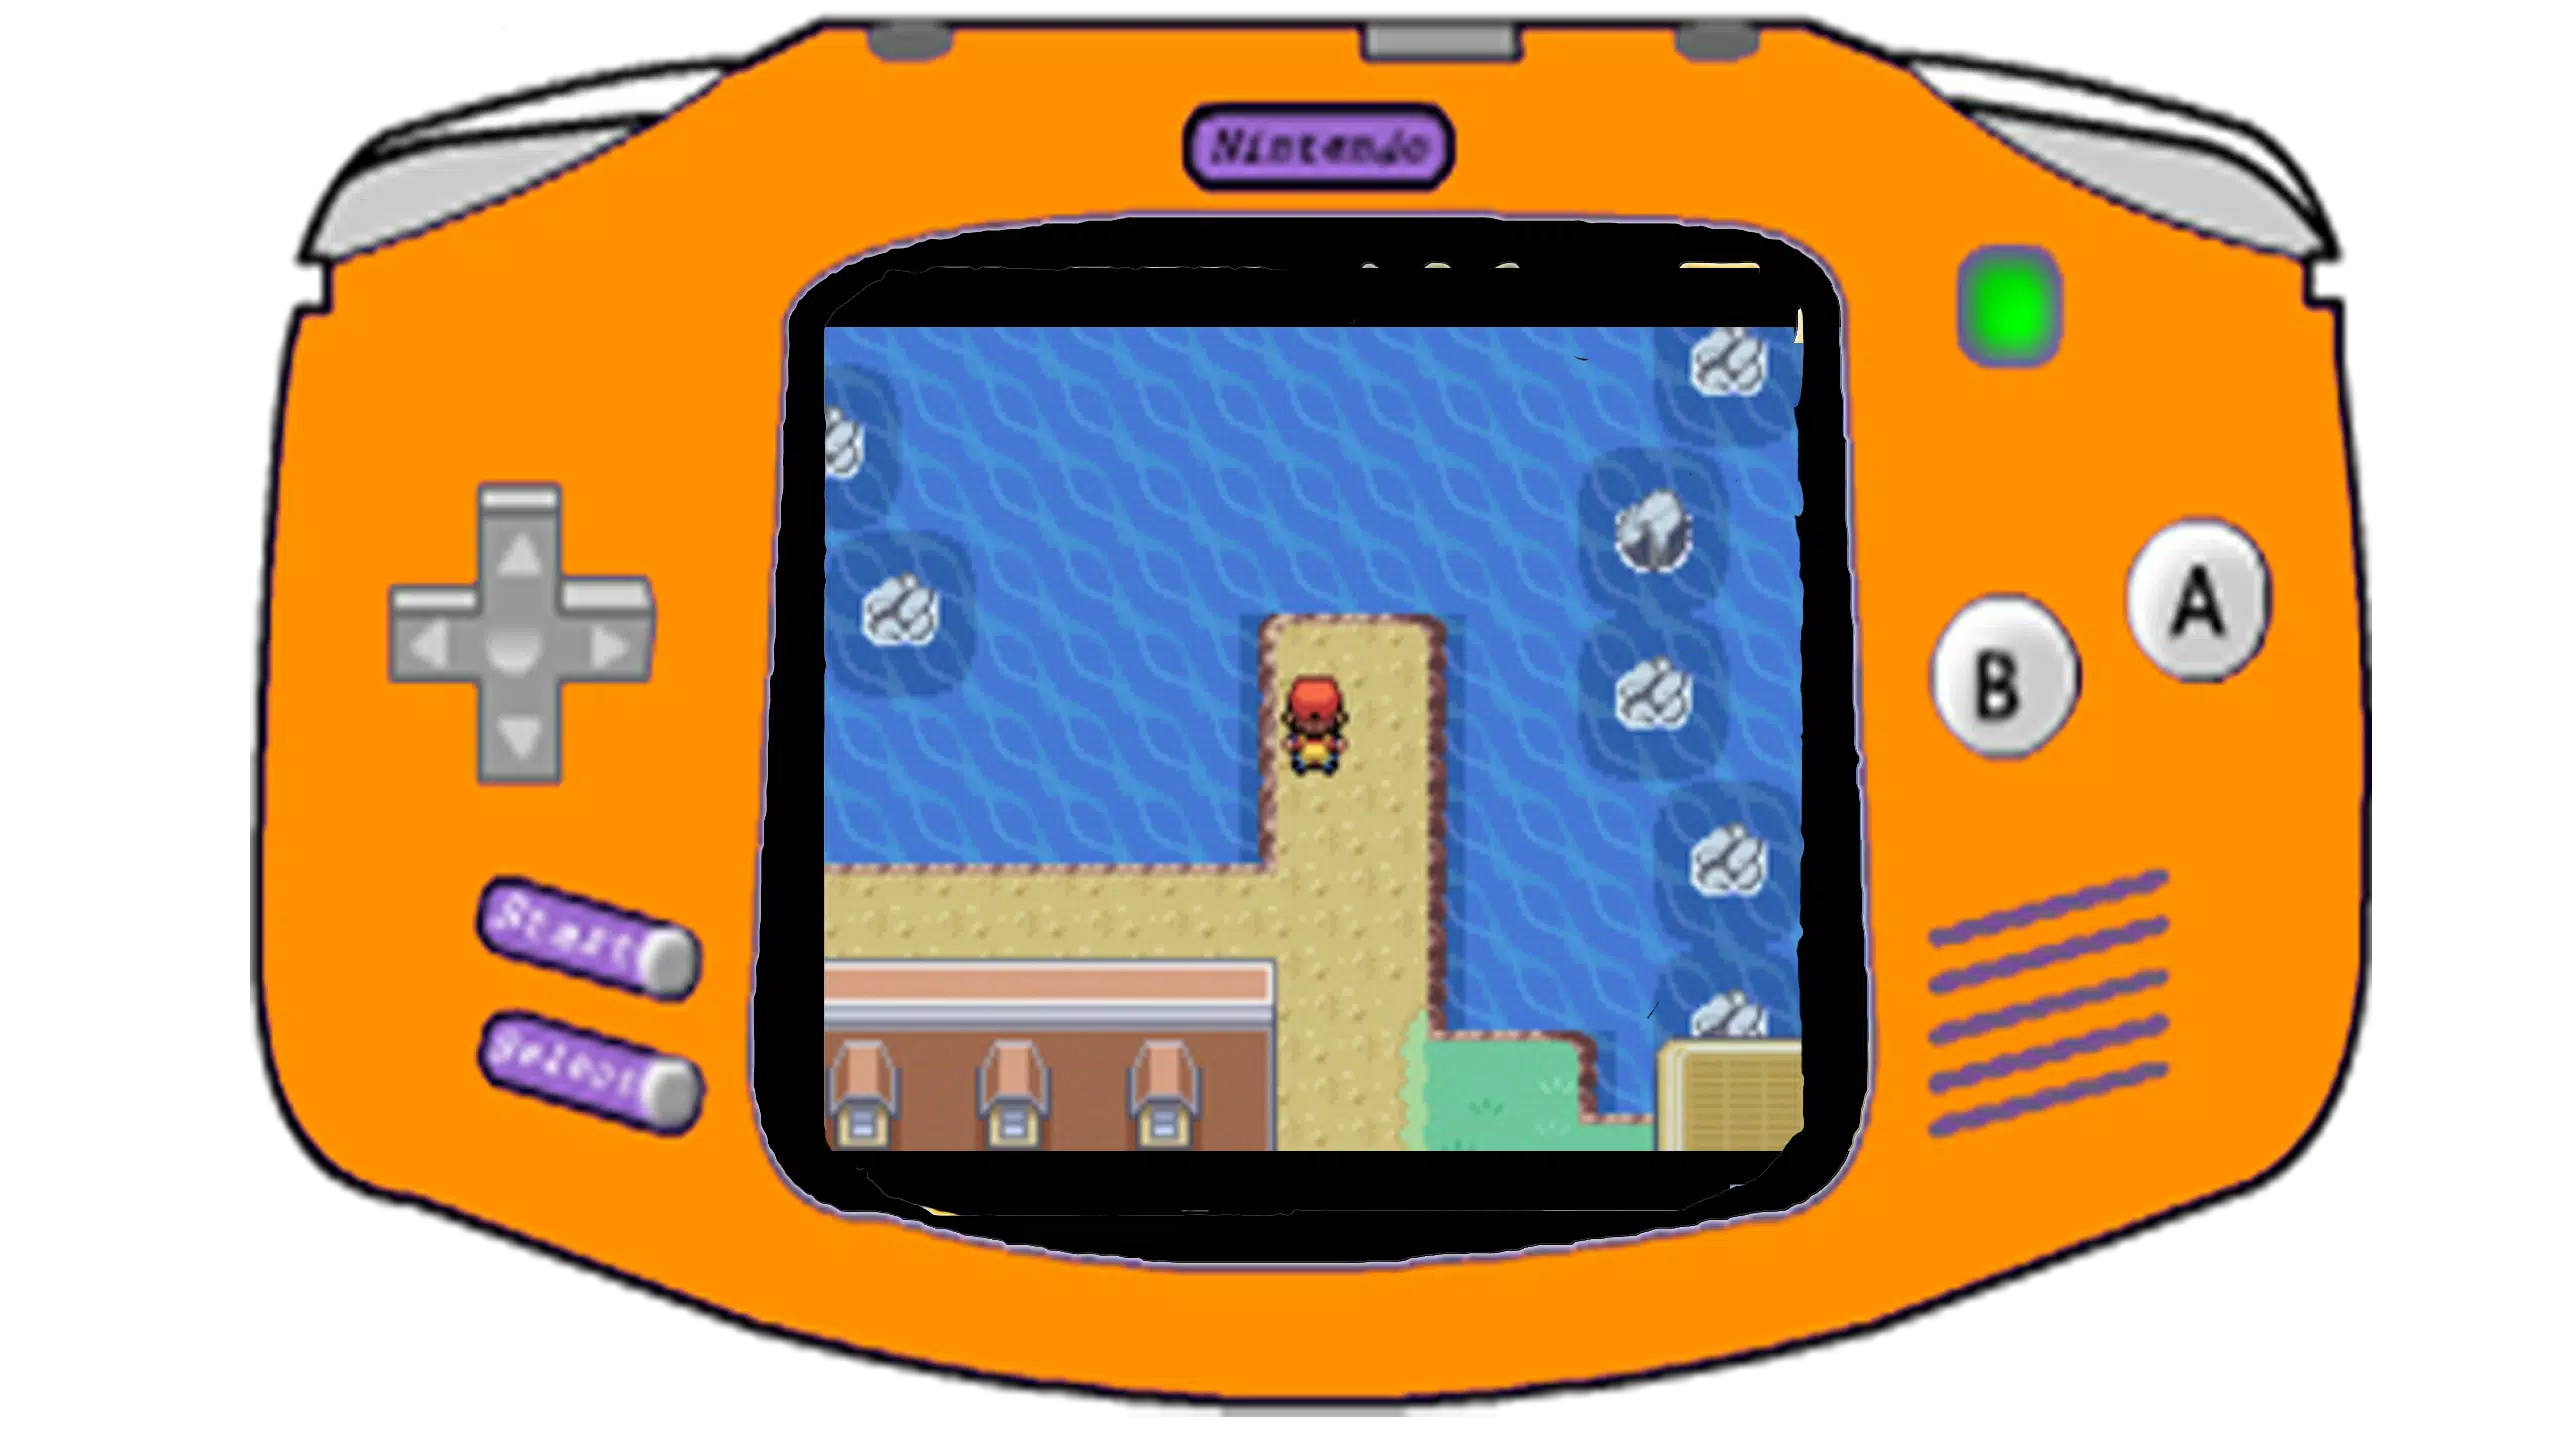 GBA Emulator - All games Free APK for Android Download